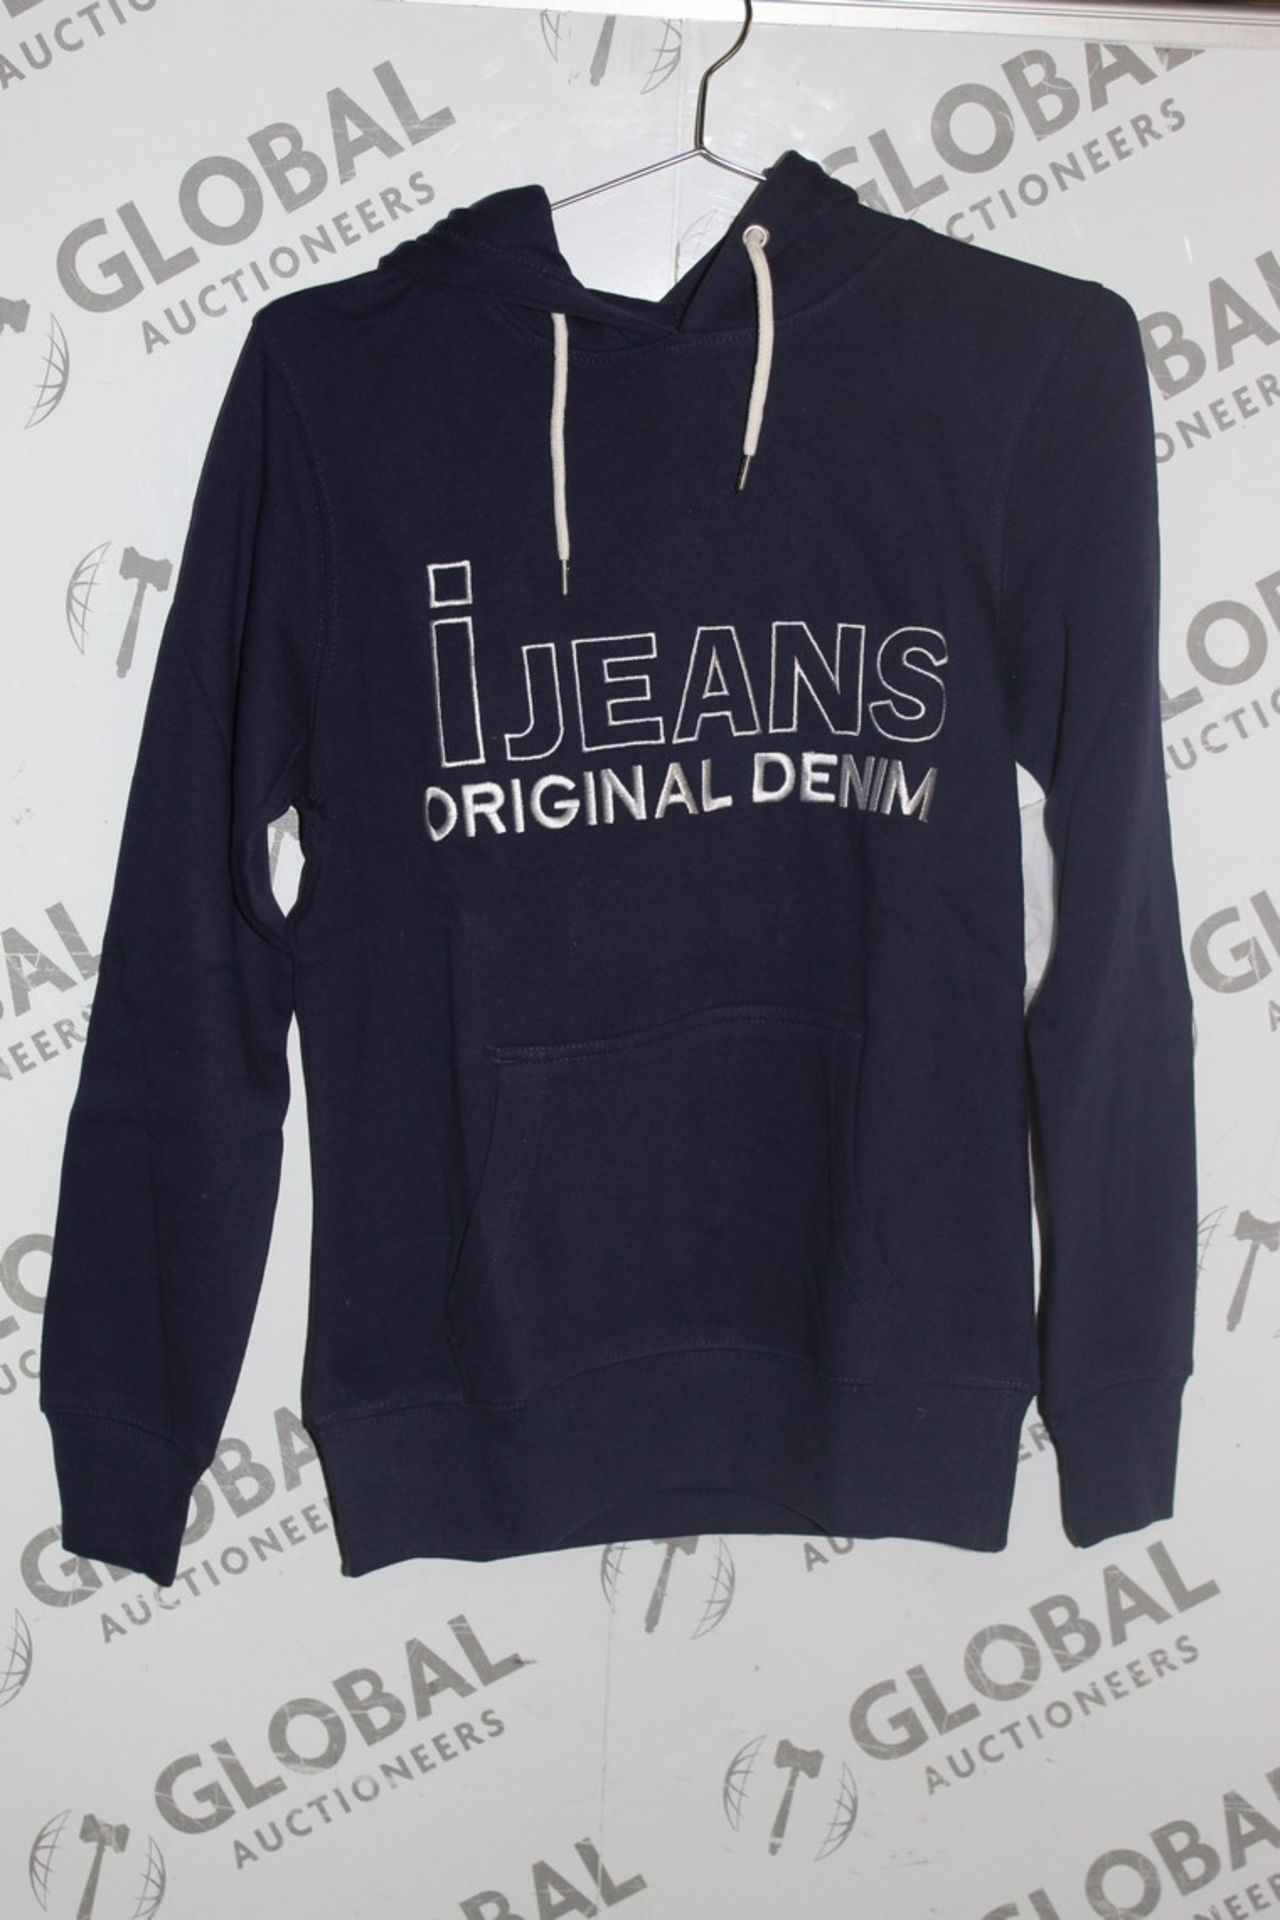 Box to Contain 16 Brand New IJeans Original Denim Navy Blue Hooded Jumpers Combined RRP £320